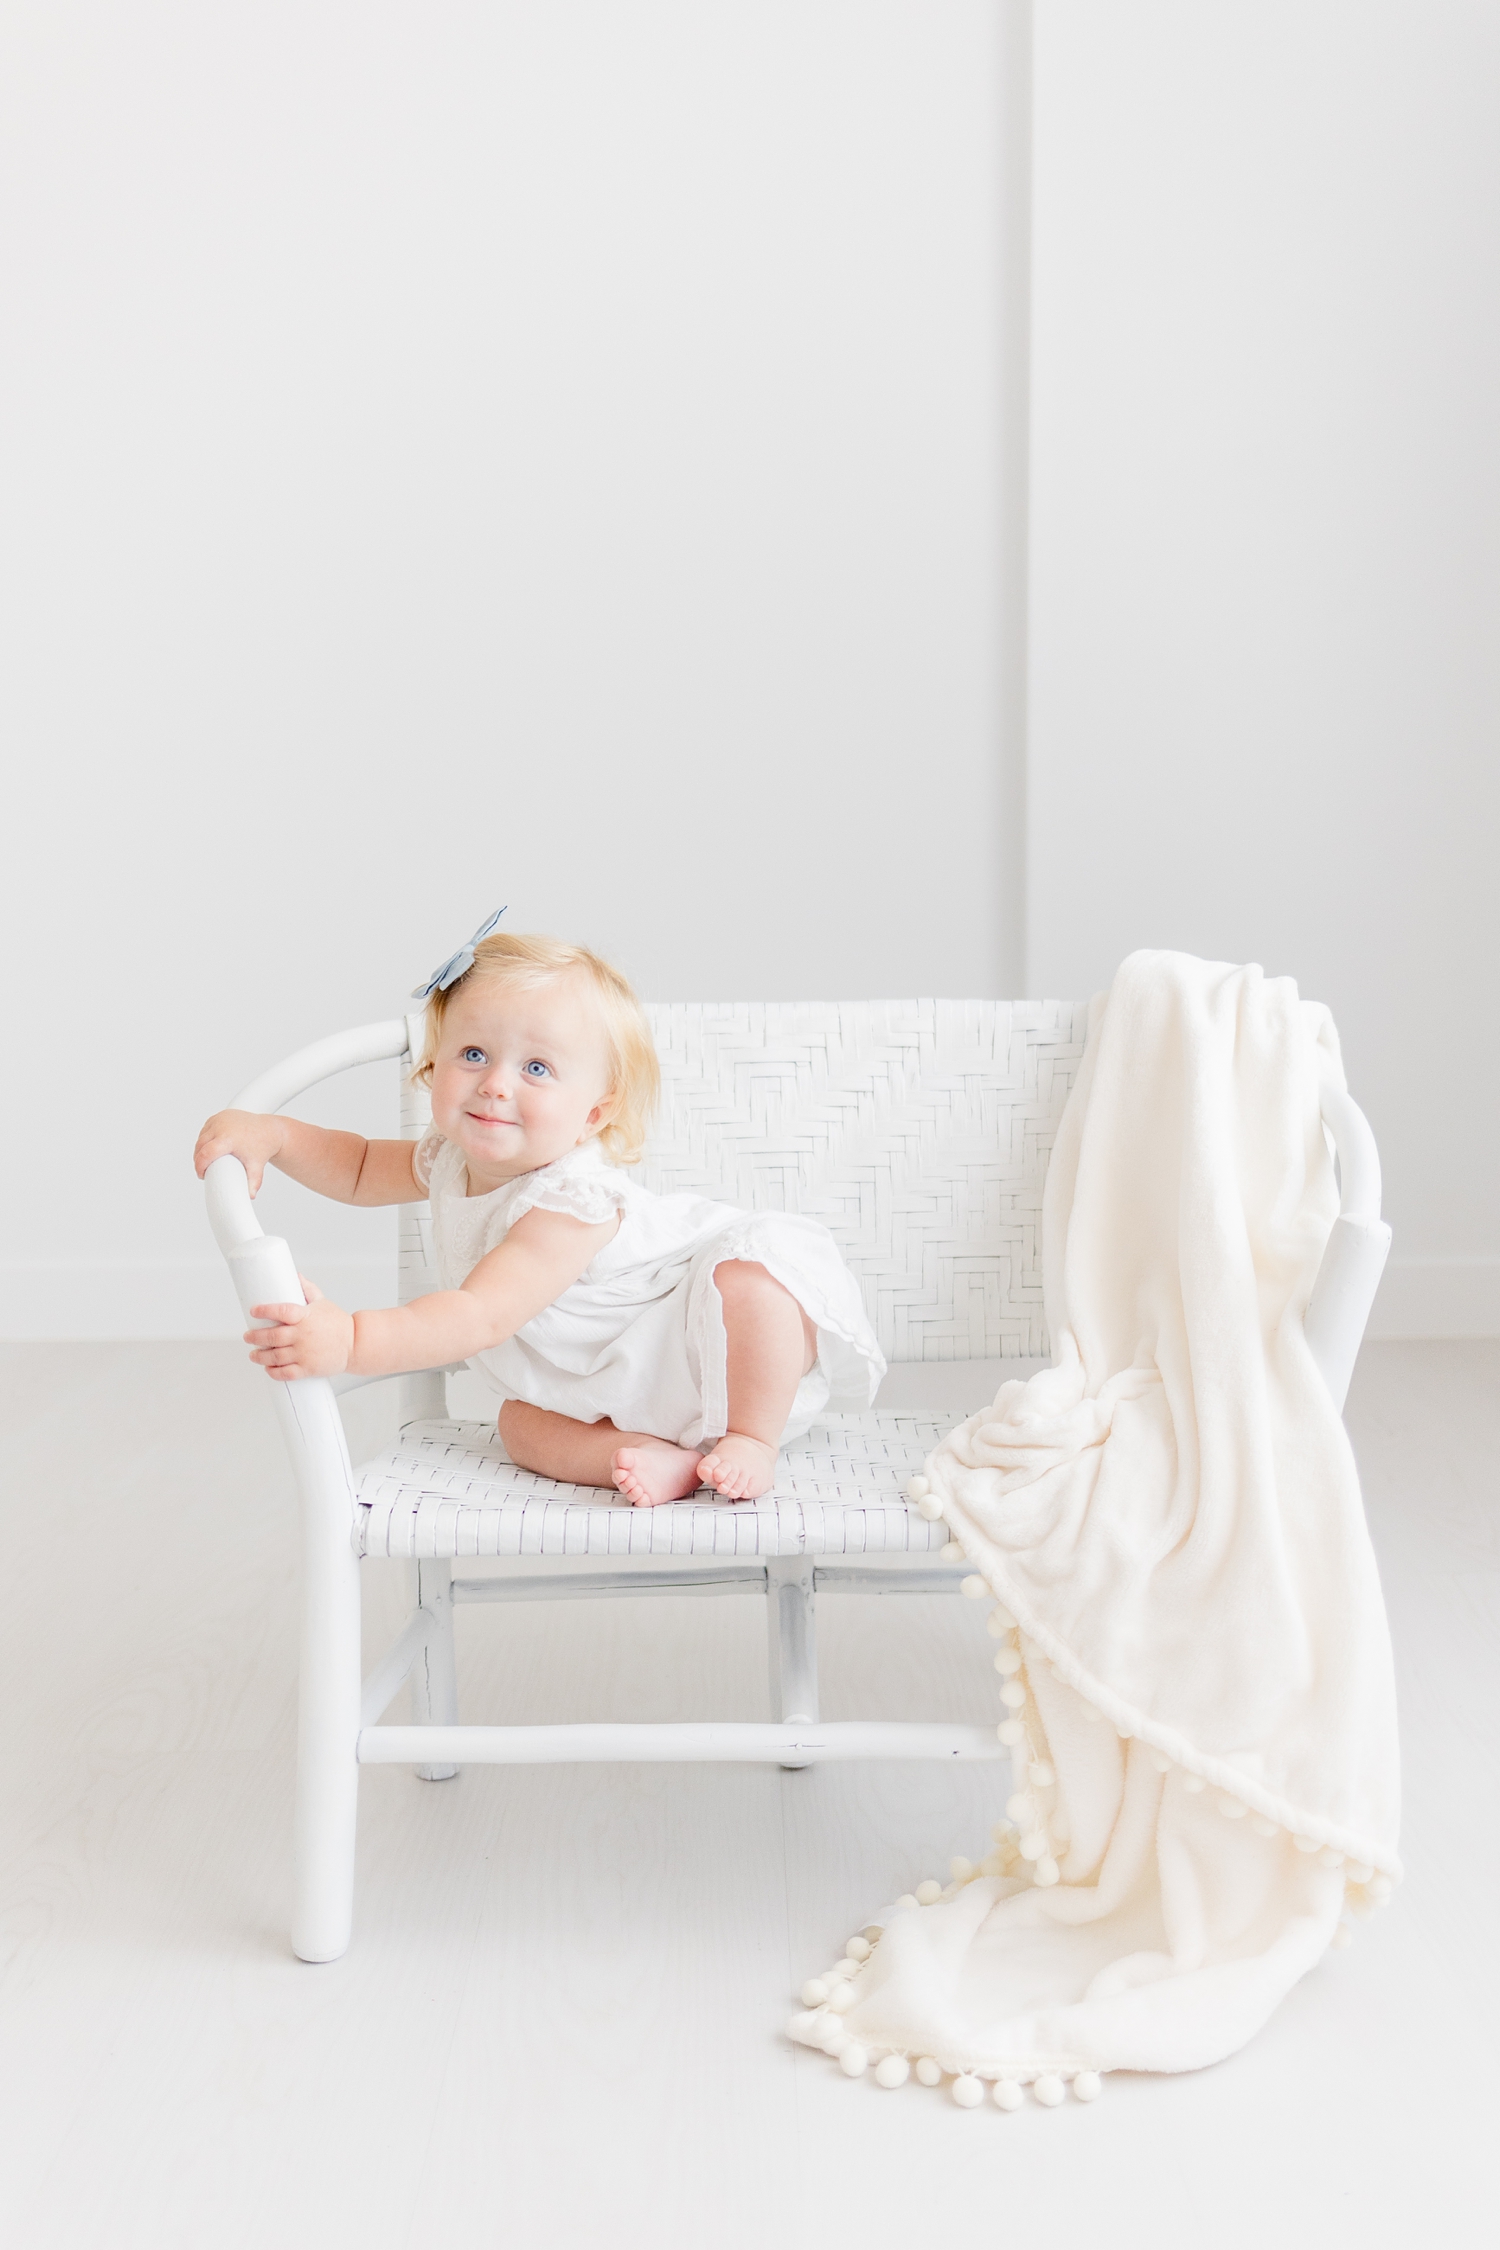 Baby Ryer dressed in white sits on a white wicker bench in a solid white room | CB Studio